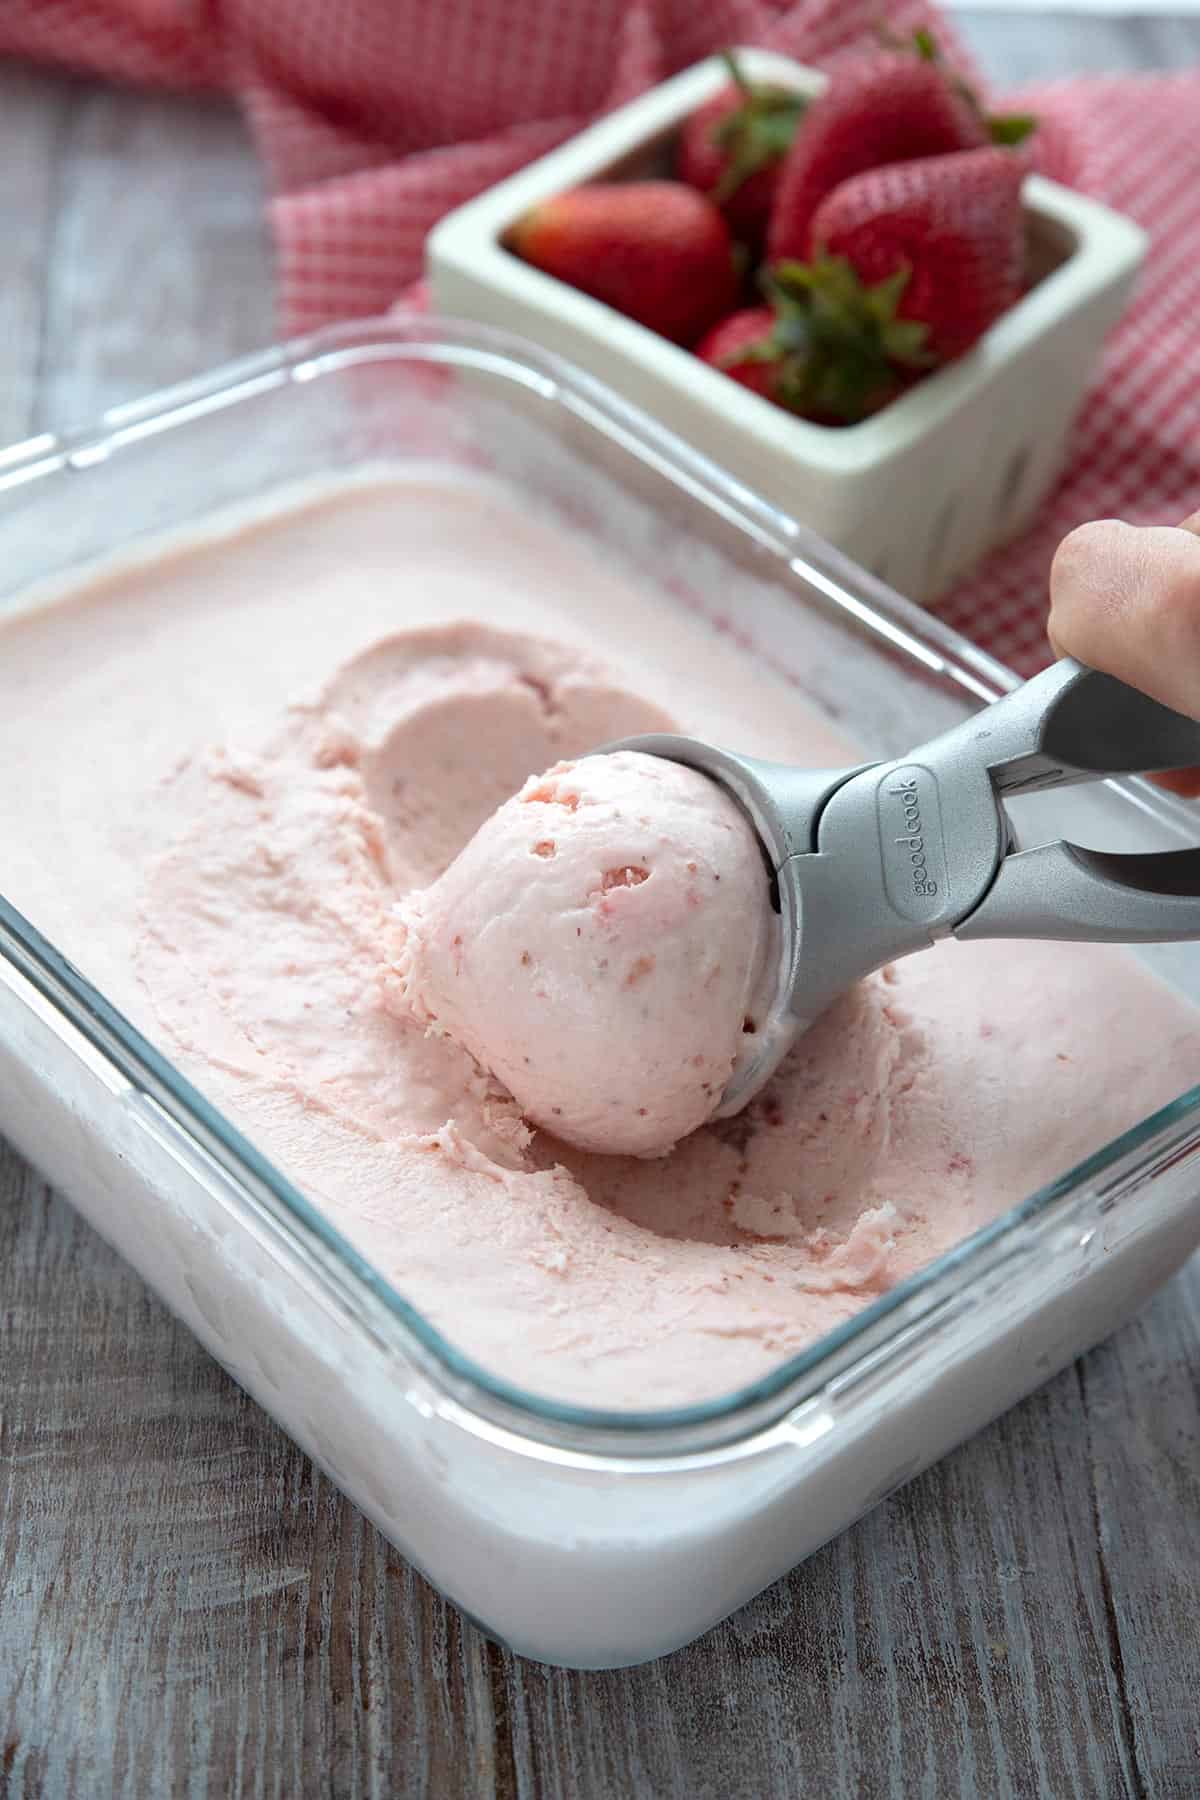 Sugar Free Strawberry Ice Cream being scooped out of a glass container.